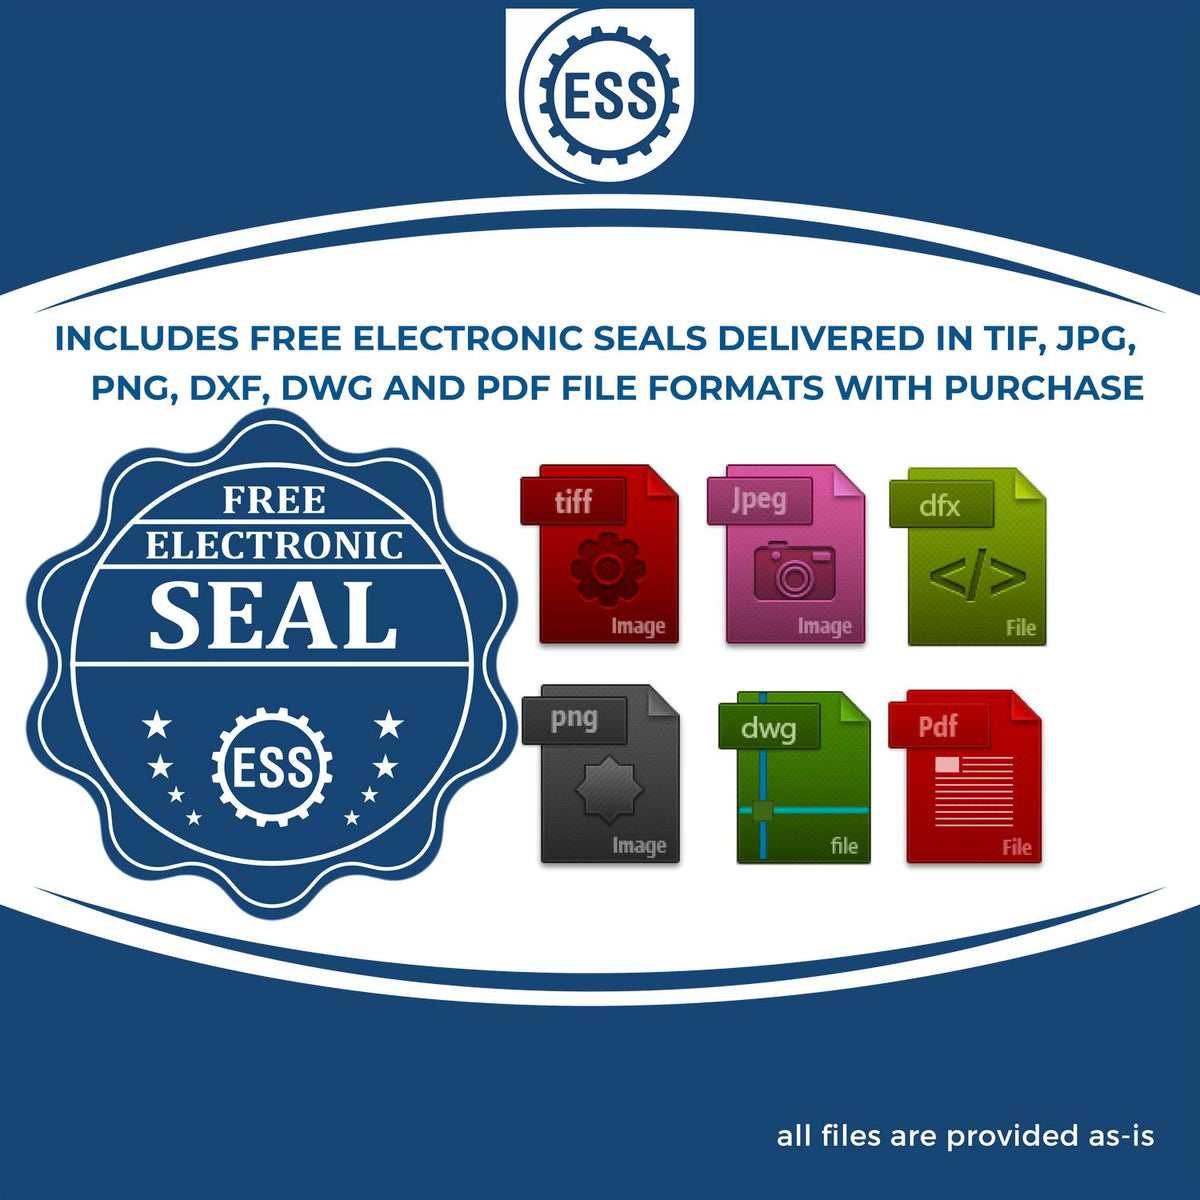 An infographic for the free electronic seal for the Slim Pre-Inked Washington Landscape Architect Seal Stamp illustrating the different file type icons such as DXF, DWG, TIF, JPG and PNG.